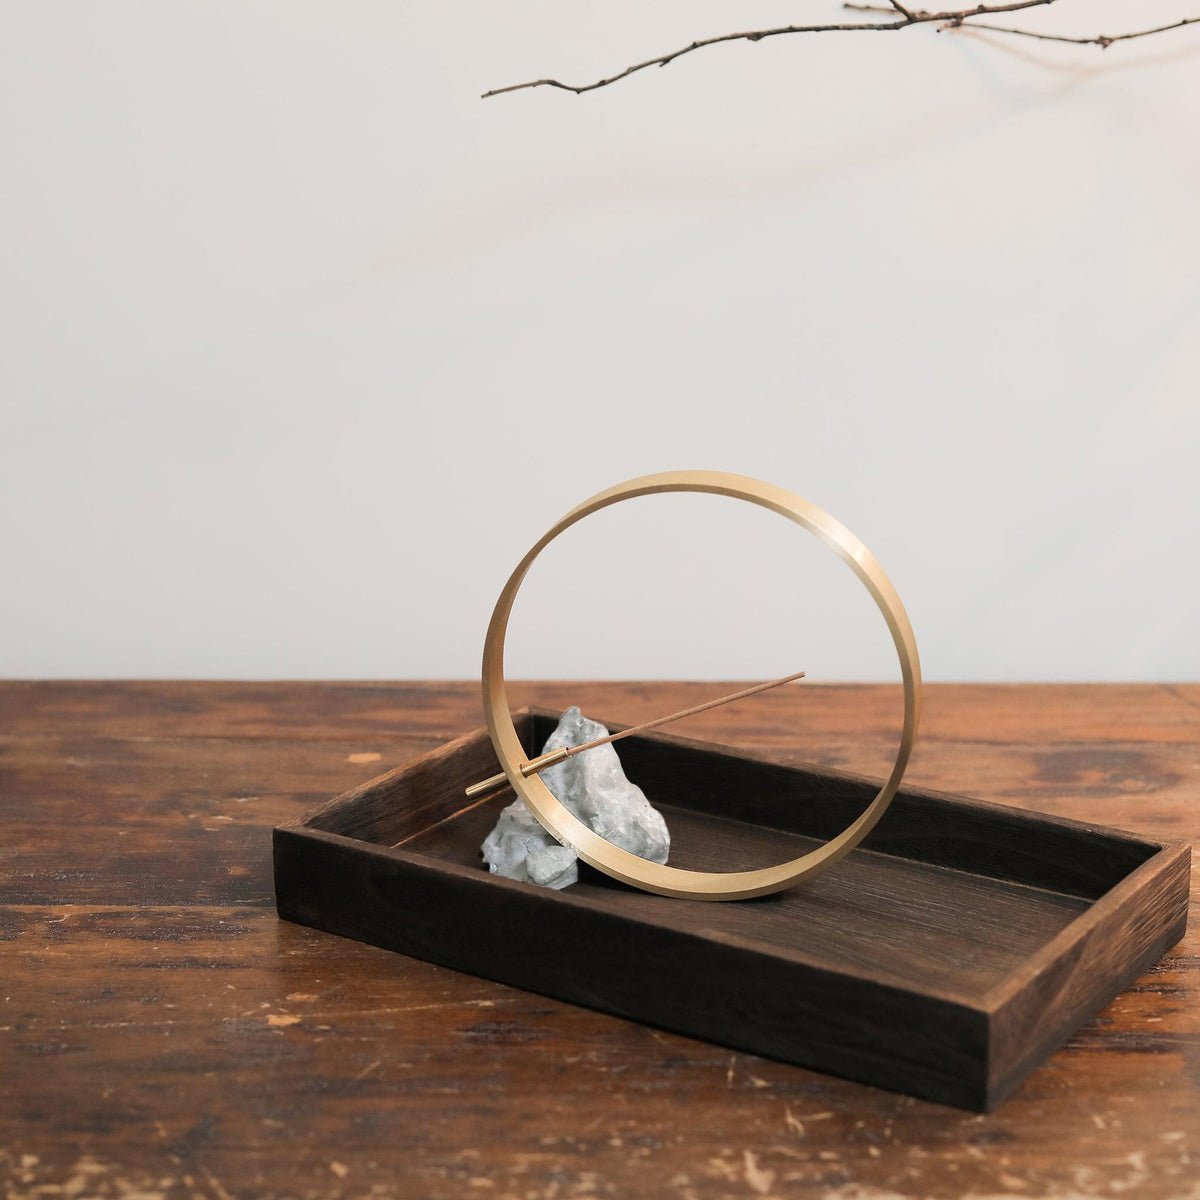 Modern Chinese incense burner by Kin Objects on a wooden tray